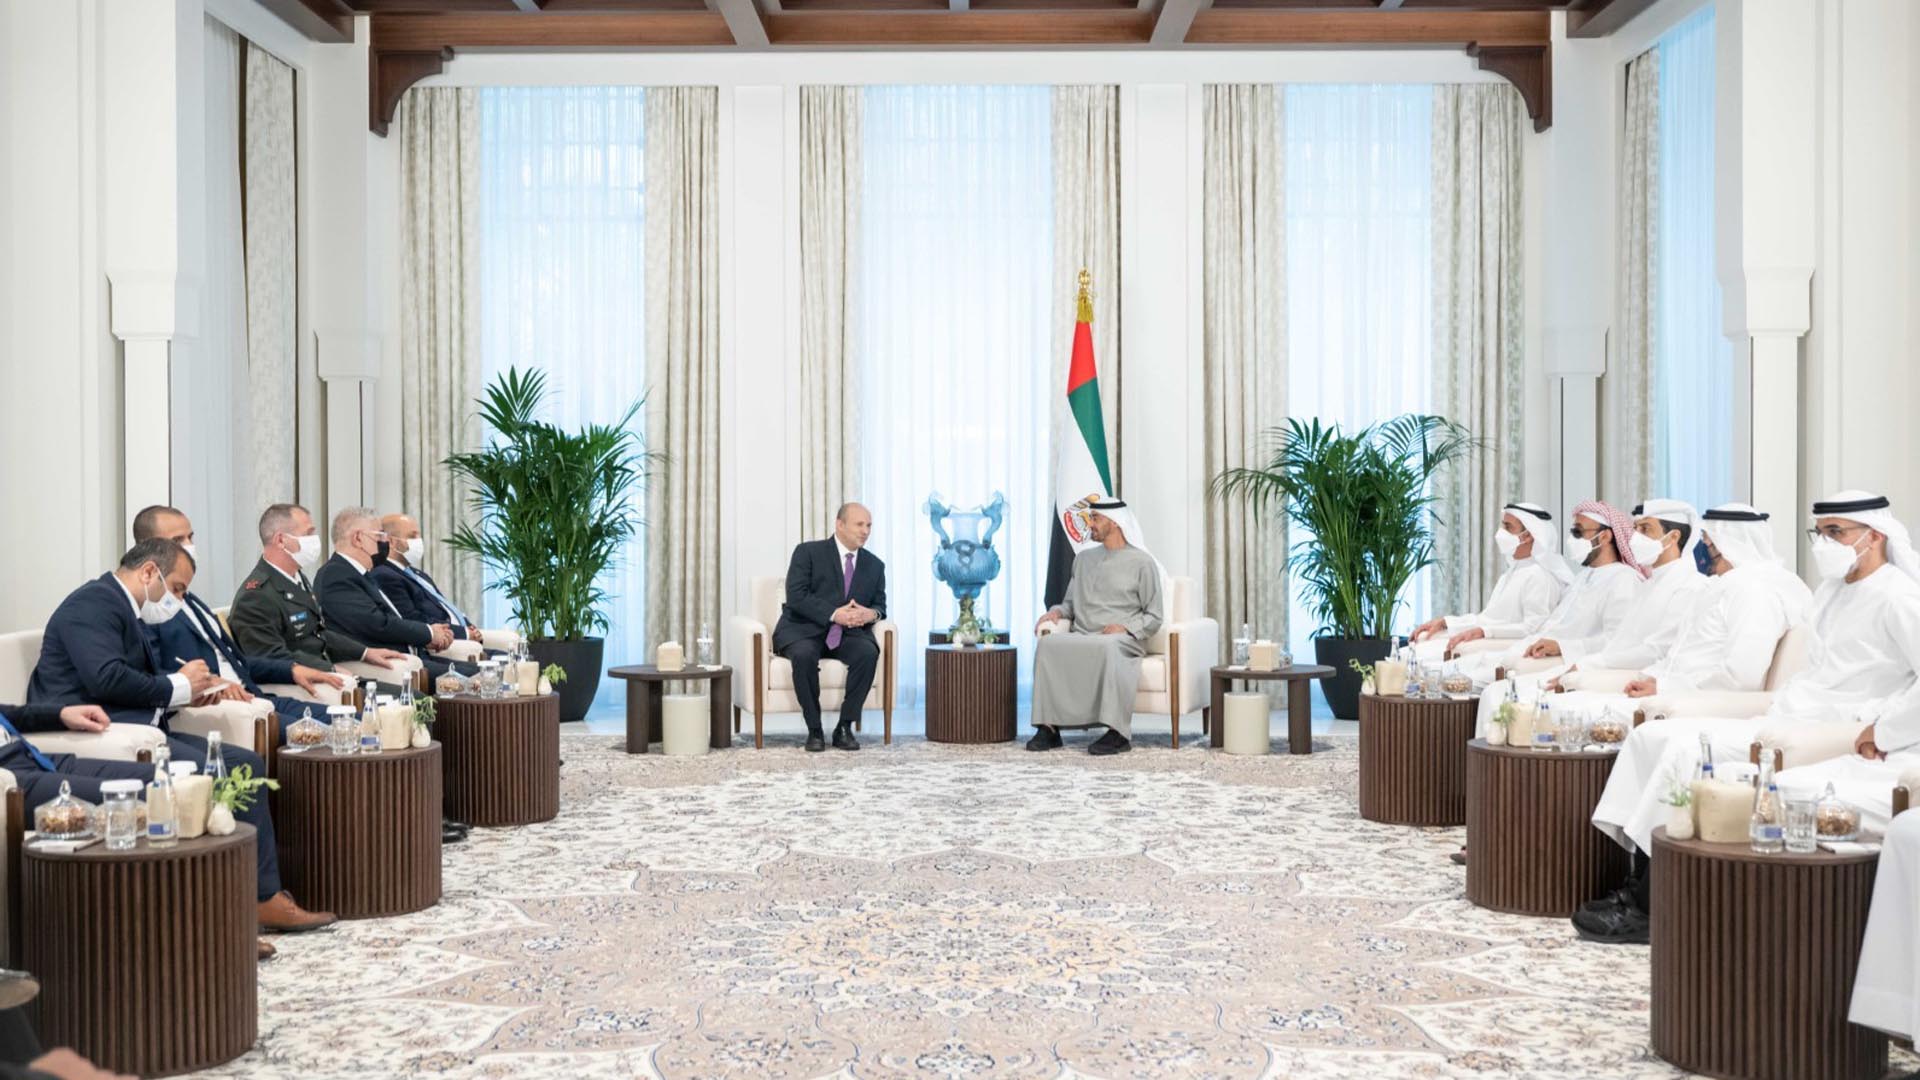 President of UAE meets with Israeli Prime Minister in Abu Dhabi